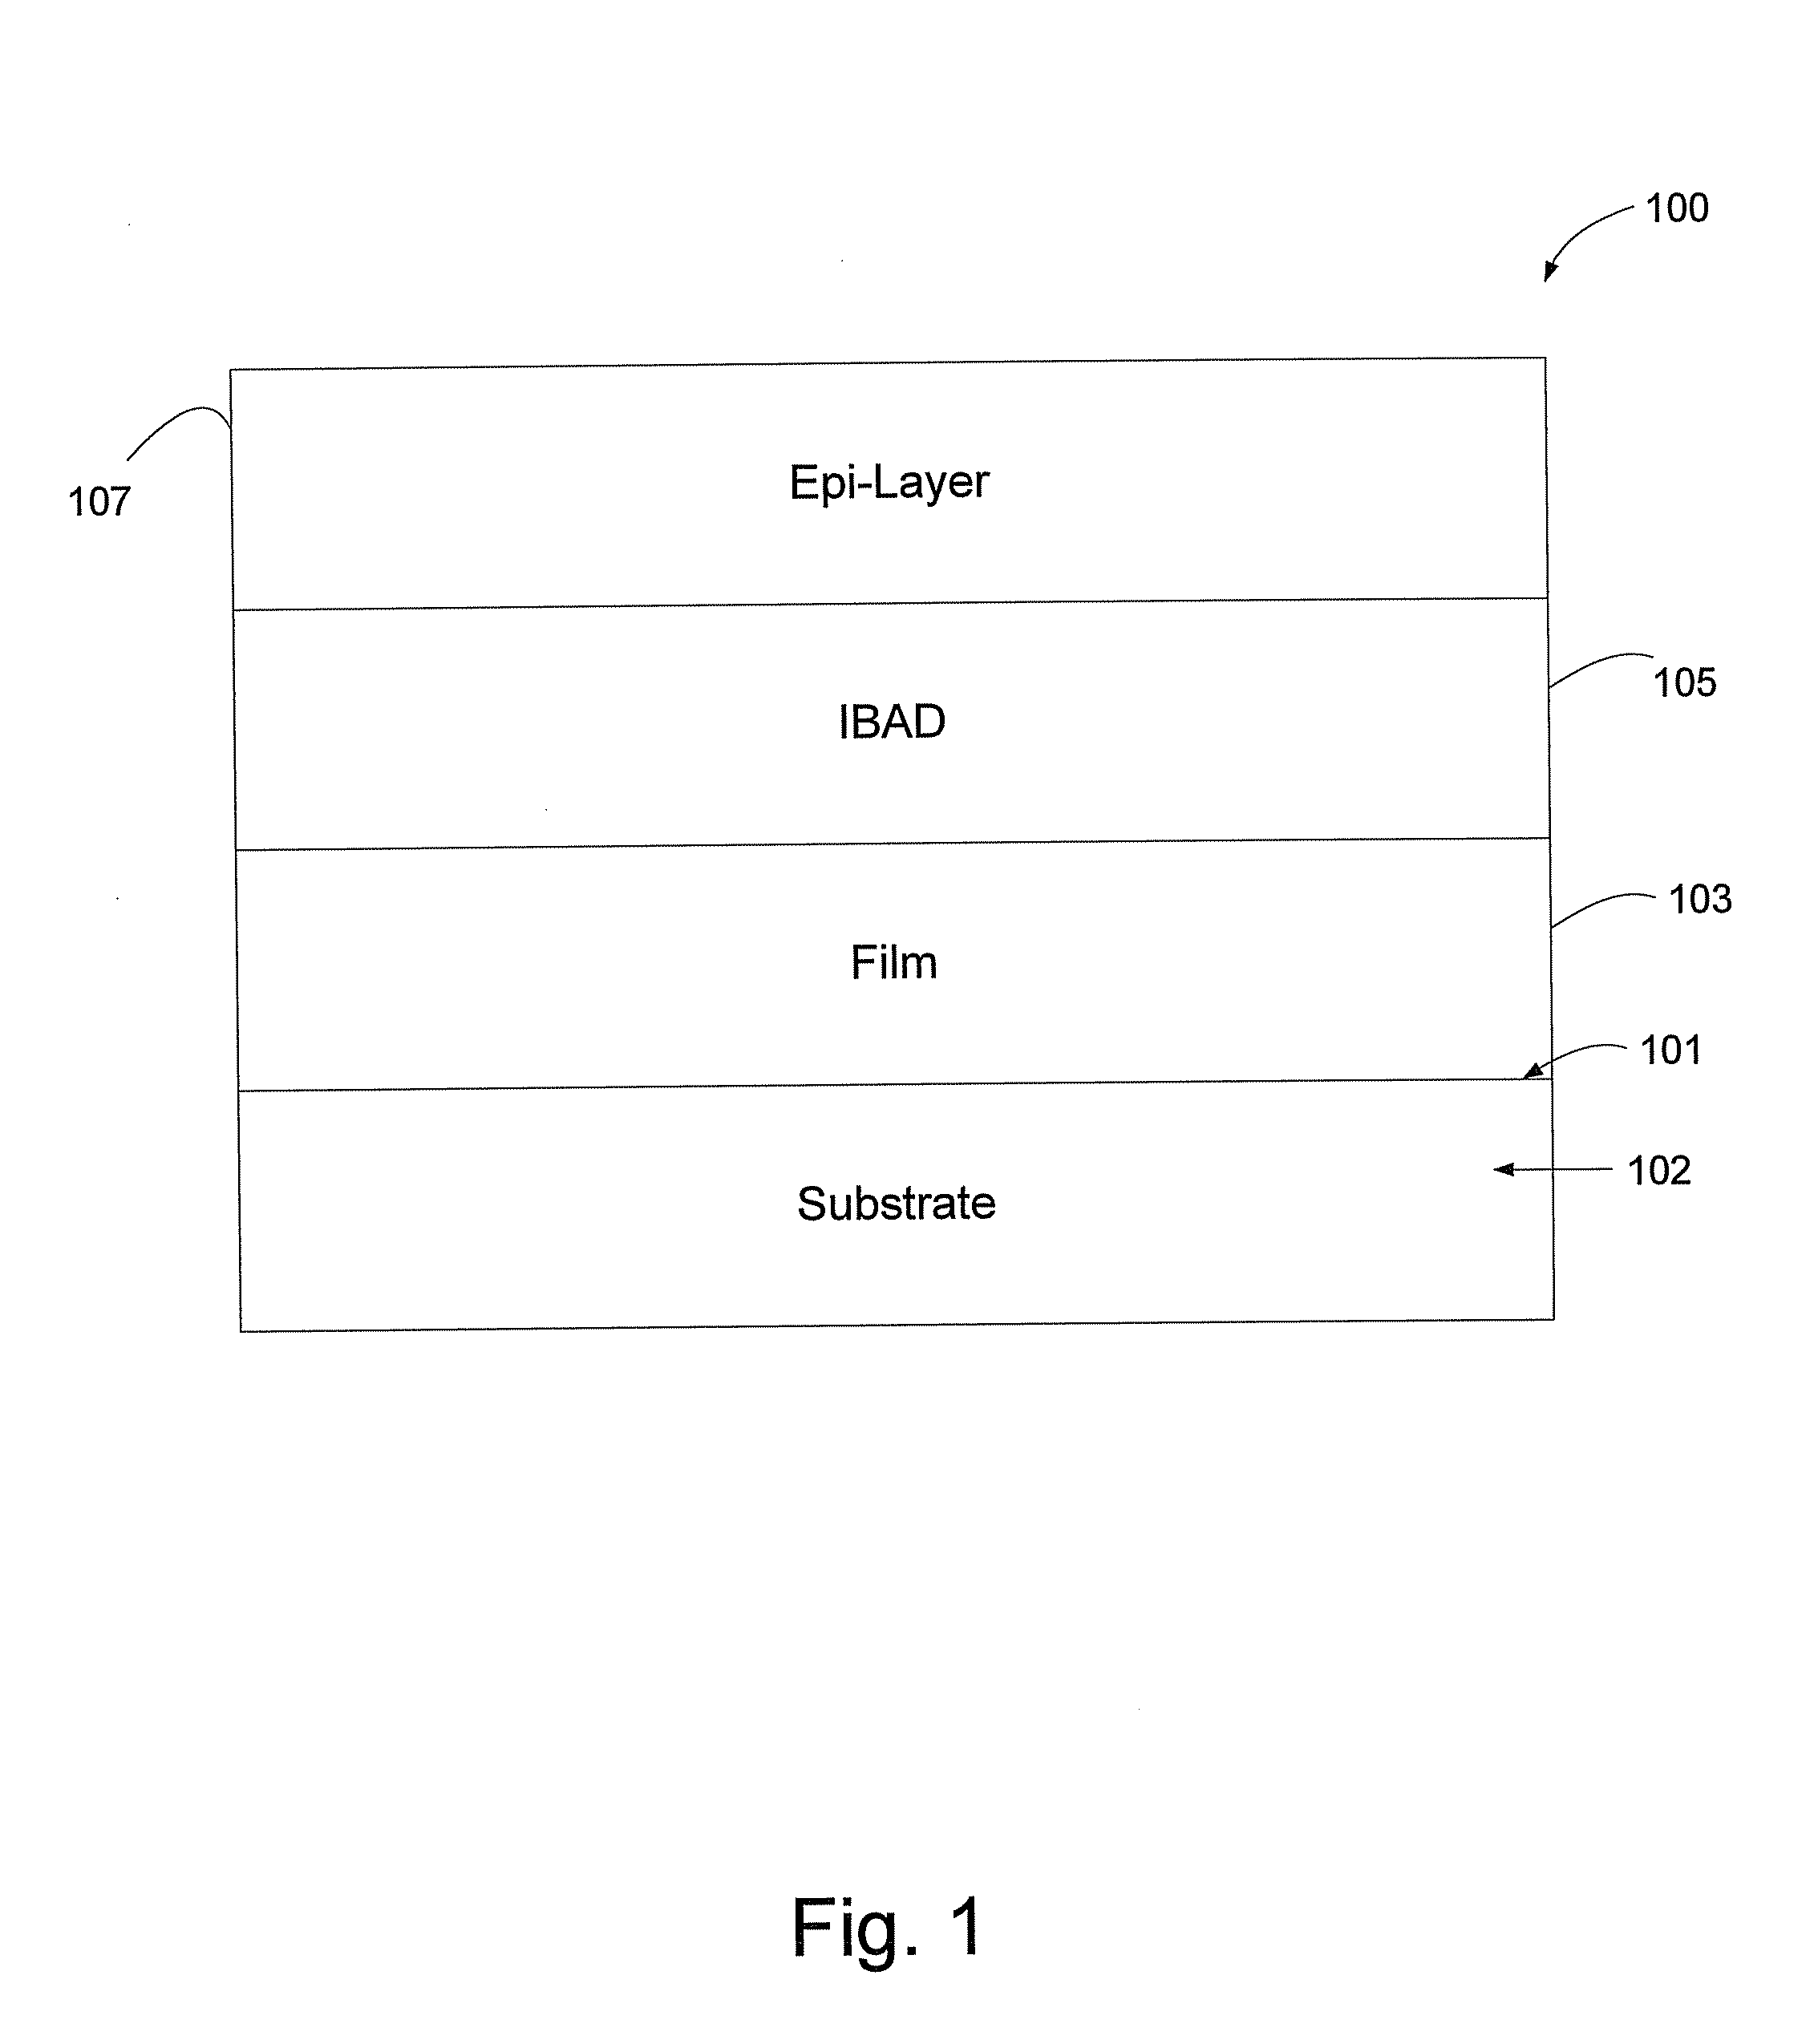 Universal nucleation layer/diffusion barrier for ion beam assisted deposition